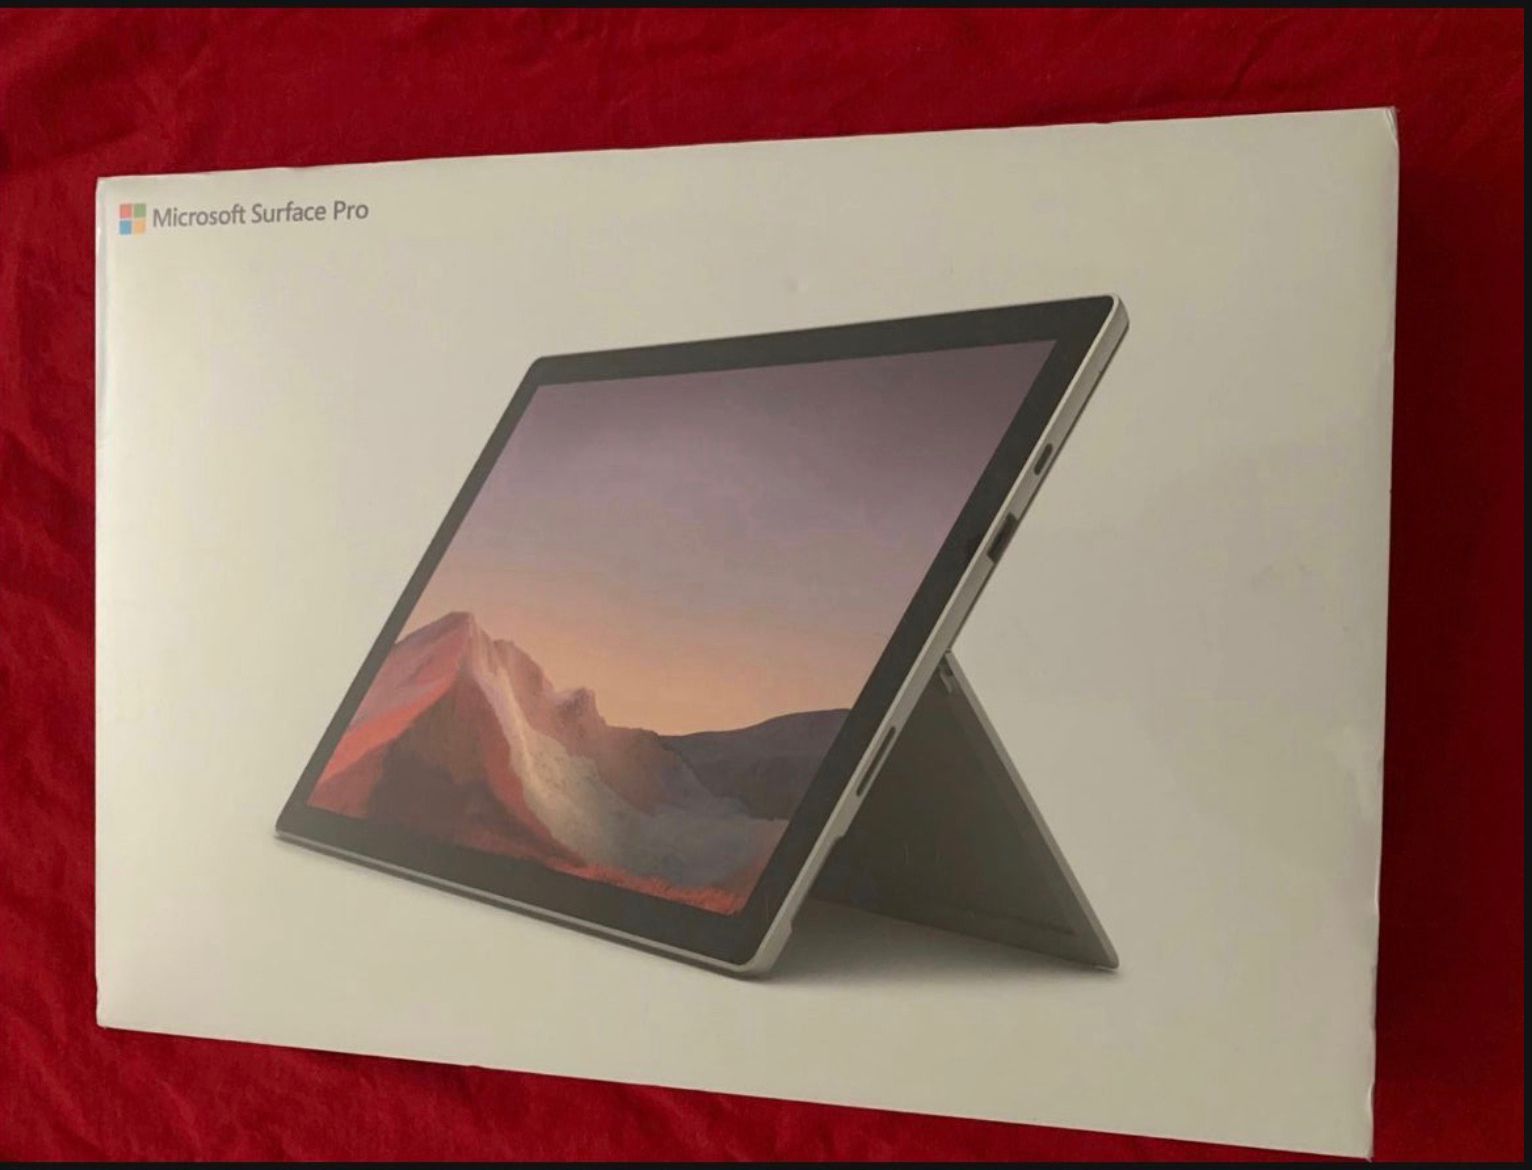 Microsoft Surface Pro 7 New Sealed i5 8gb 256gb 12.3 Inch Screen I Can Deliver For Sale Or Trade For iPhone 14 Pro Max Verizon Unlocked 